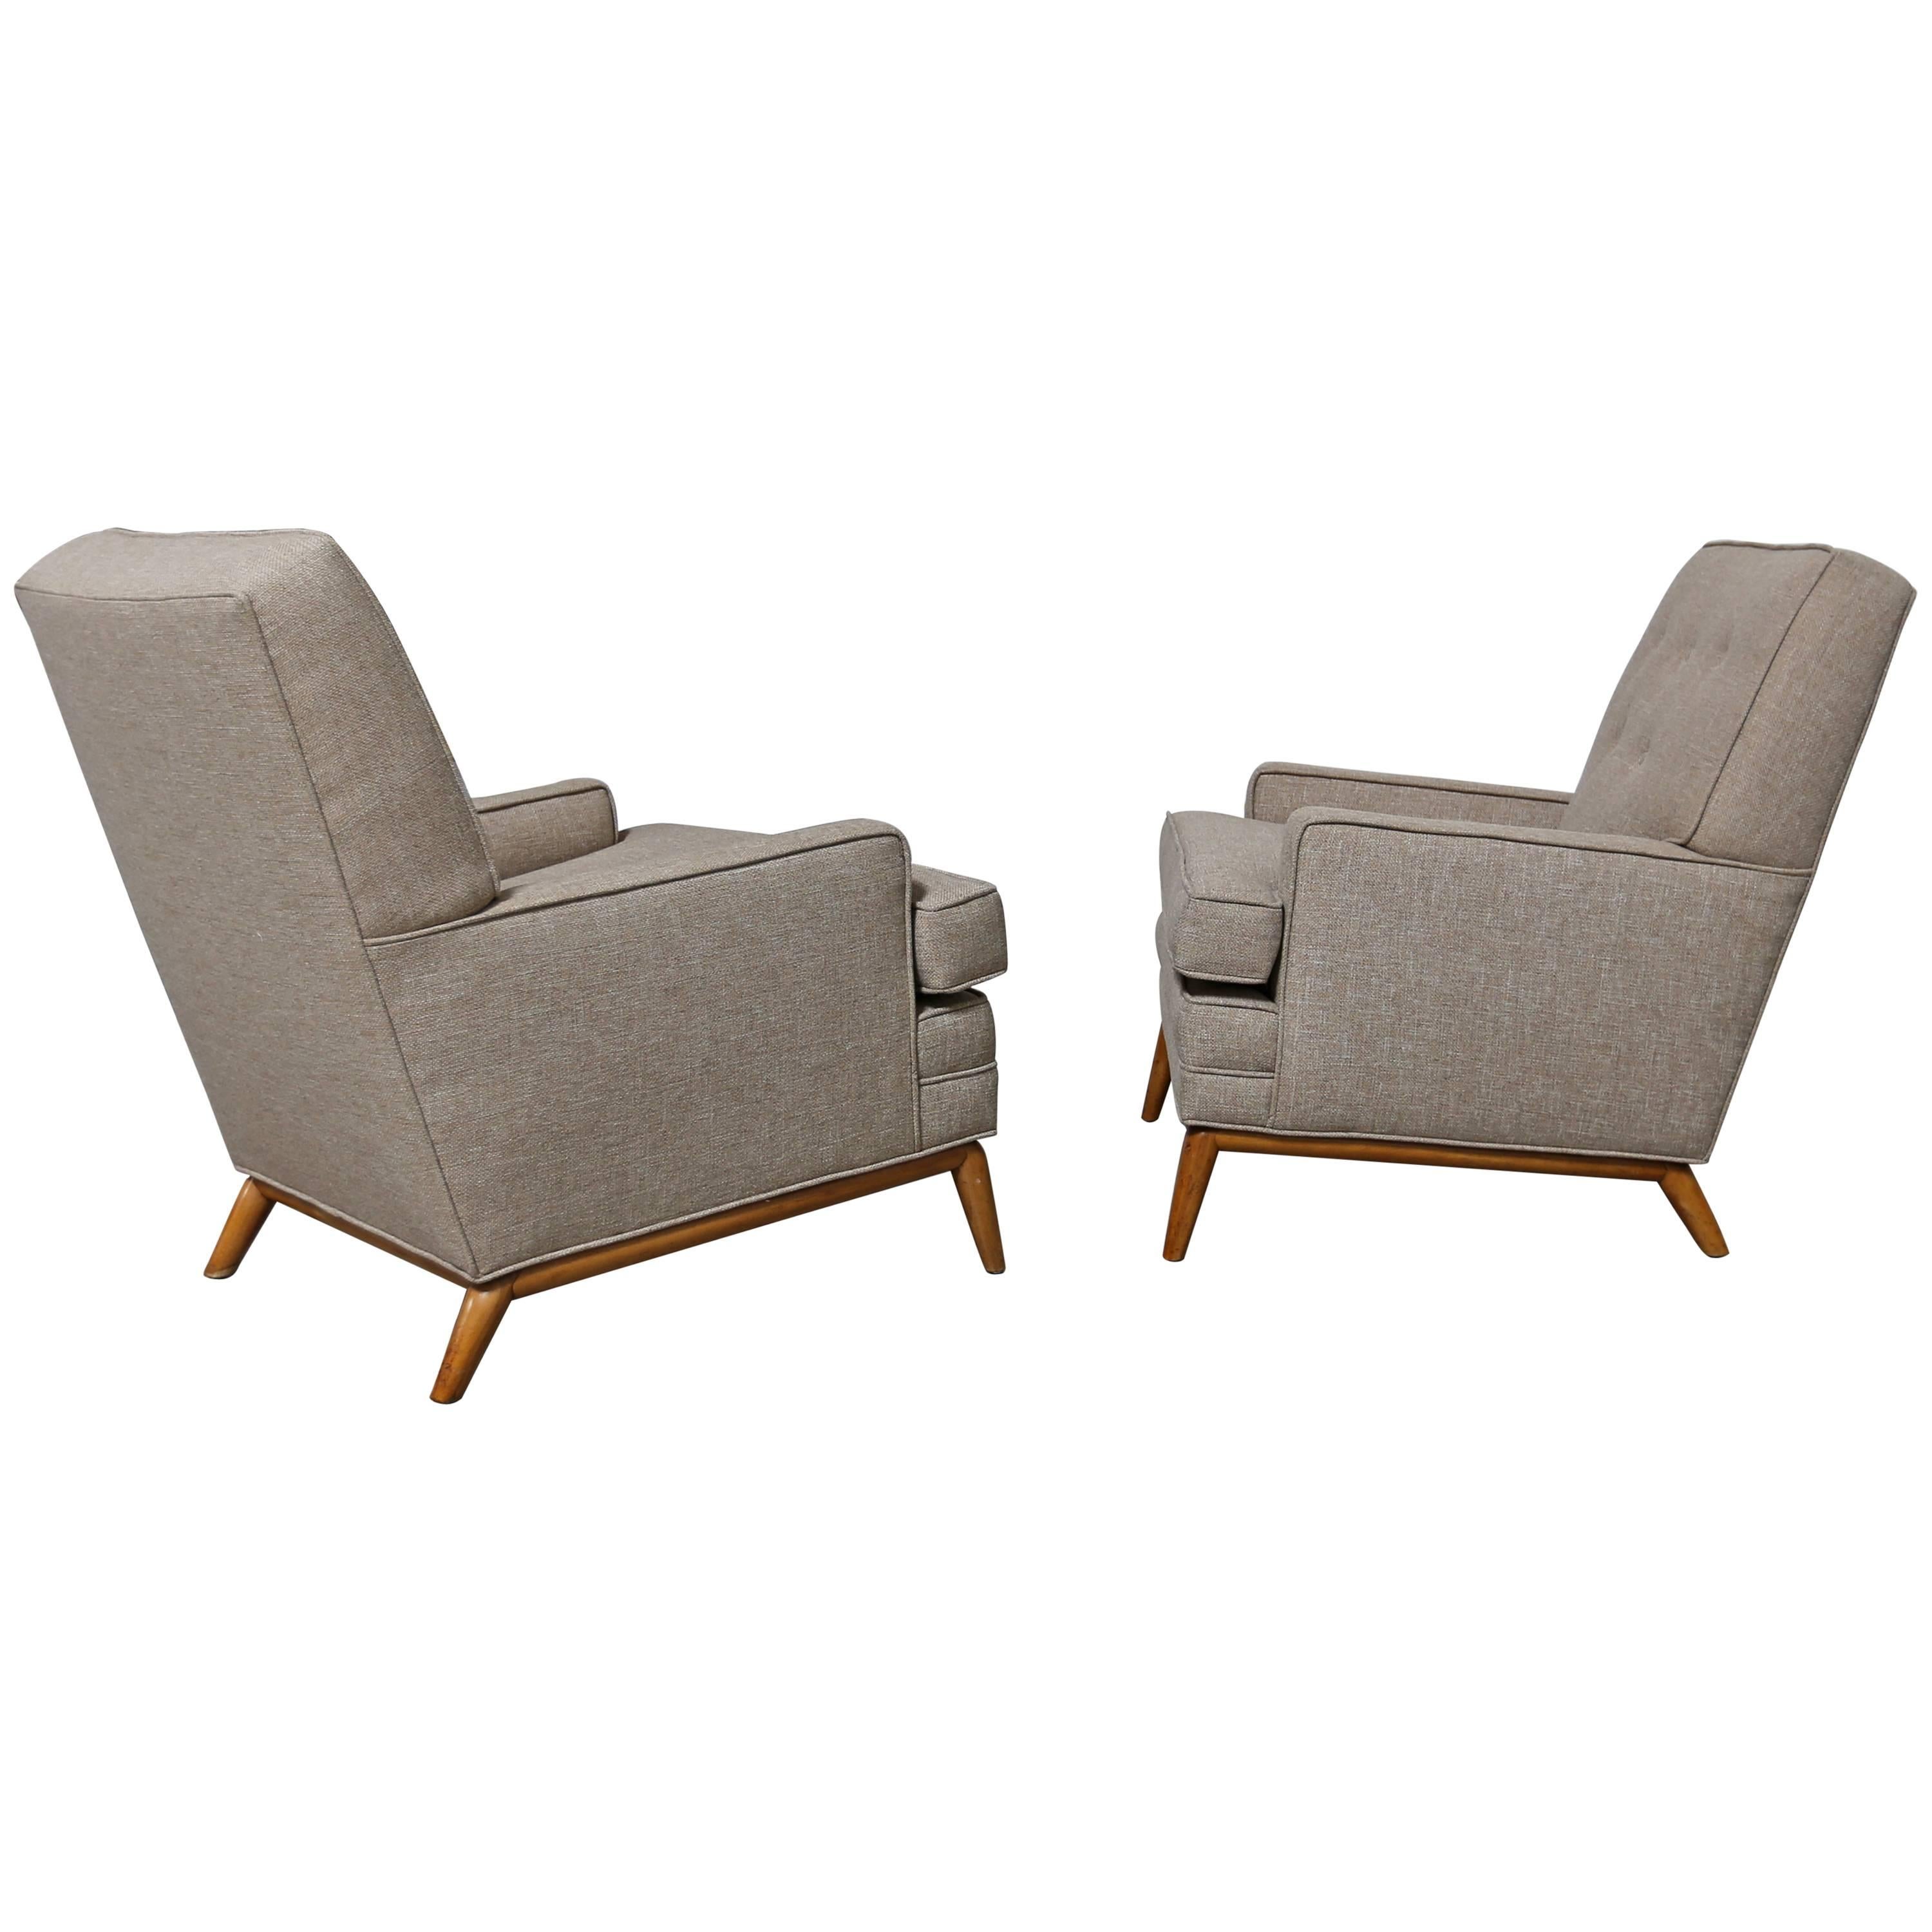 Classic Pair of Lounge Chairs by T.H. Robsjohn-Gibbings